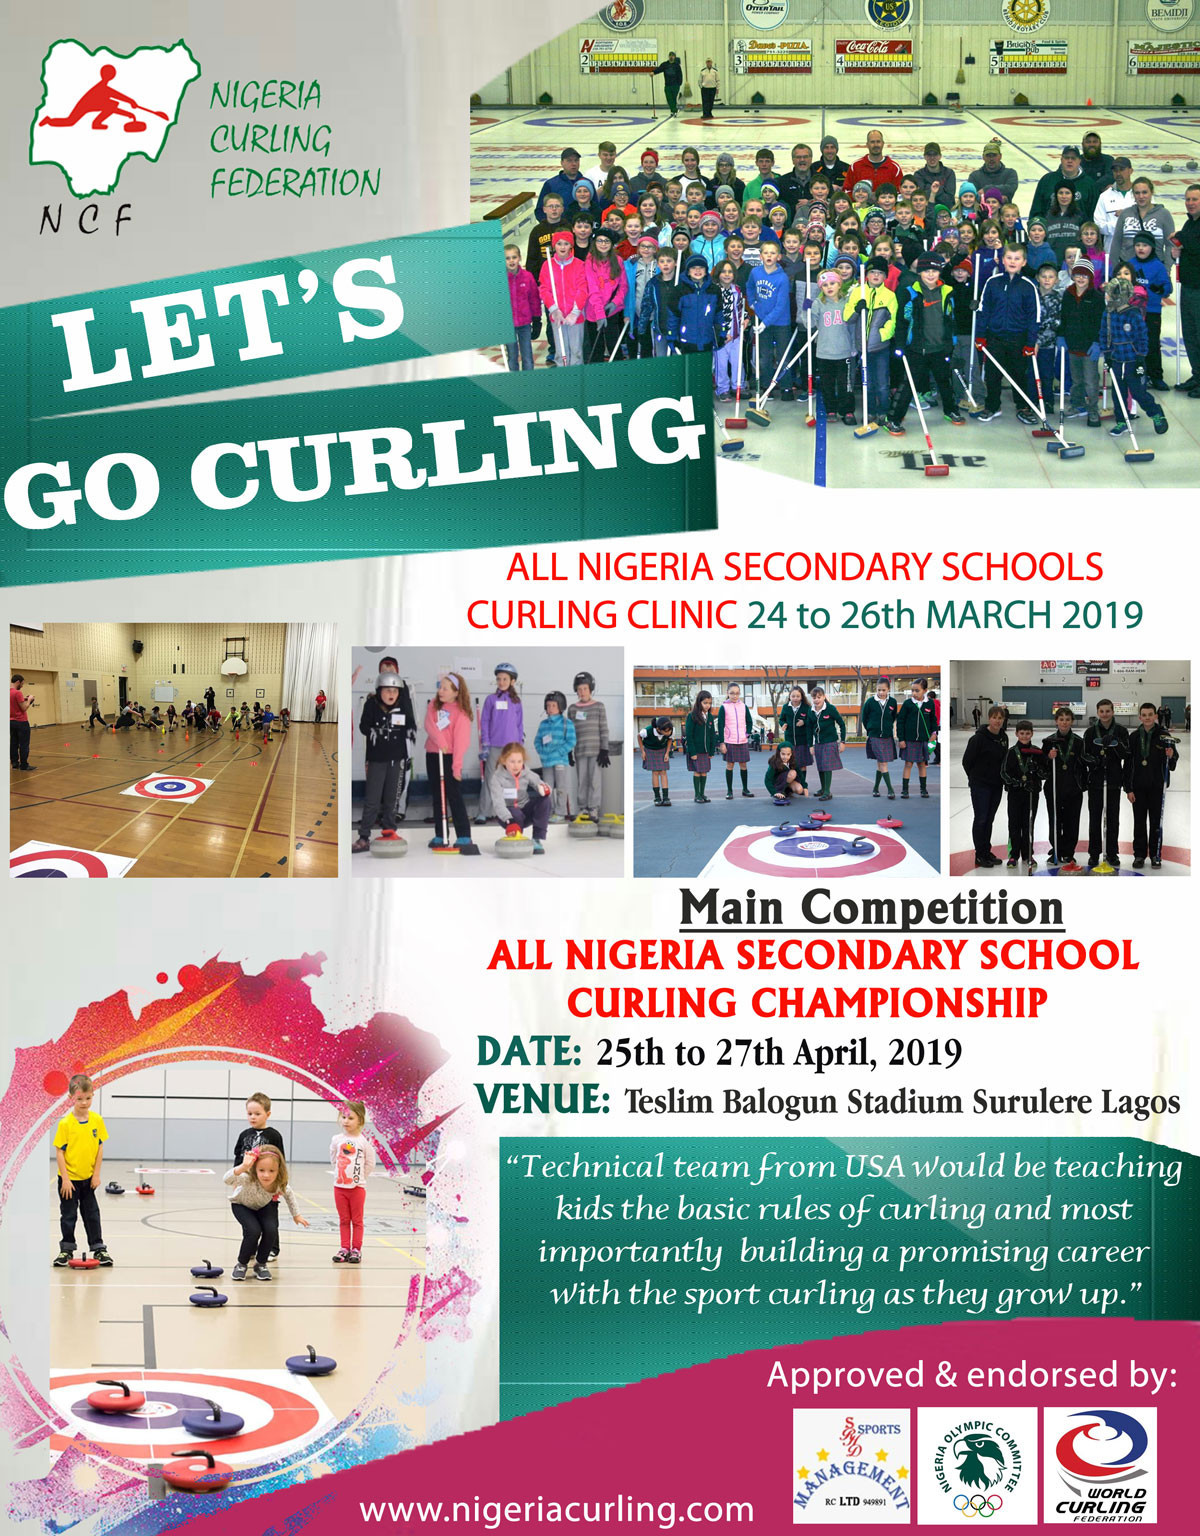 The Nigeria Curling Federation (NCF) has organised a secondary school curling championship in April, which will be the first national curling event in the country ©Nigeria Curling Federation